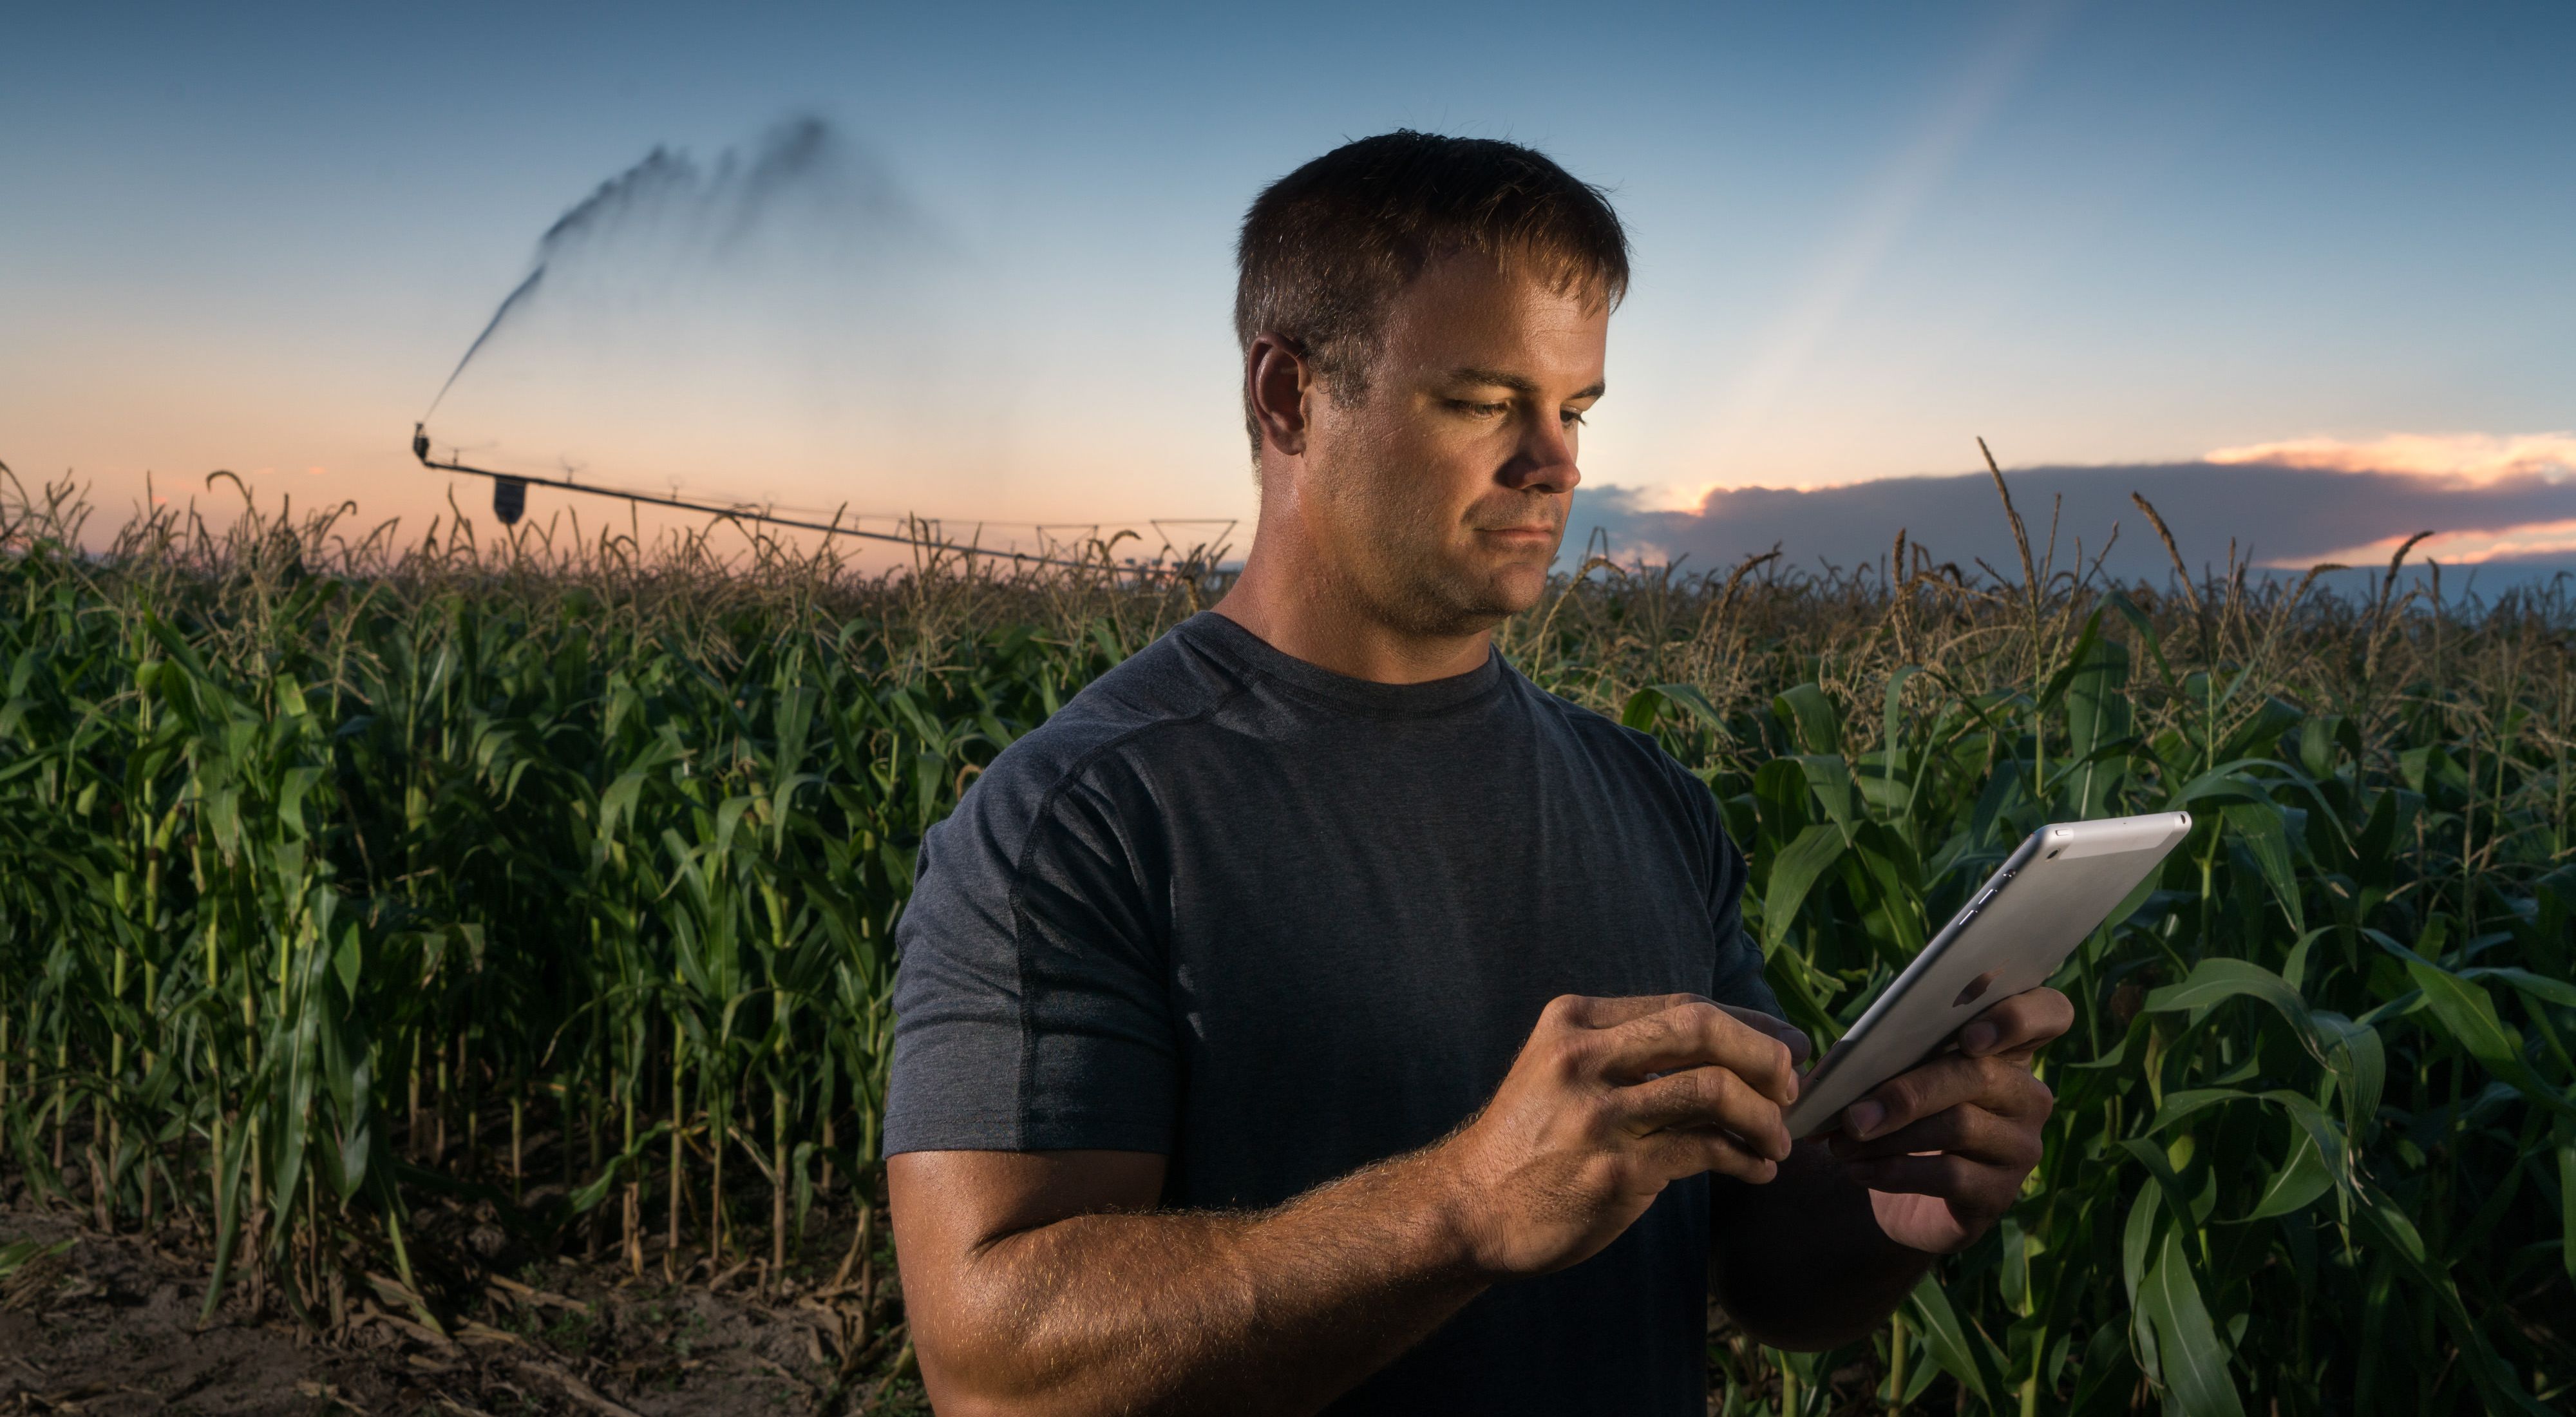 GPS irrigation mapping. Mike Svboda, of Svboda farms in Nebraska, controls his irrigation pivot from the GPS software on his iPad.